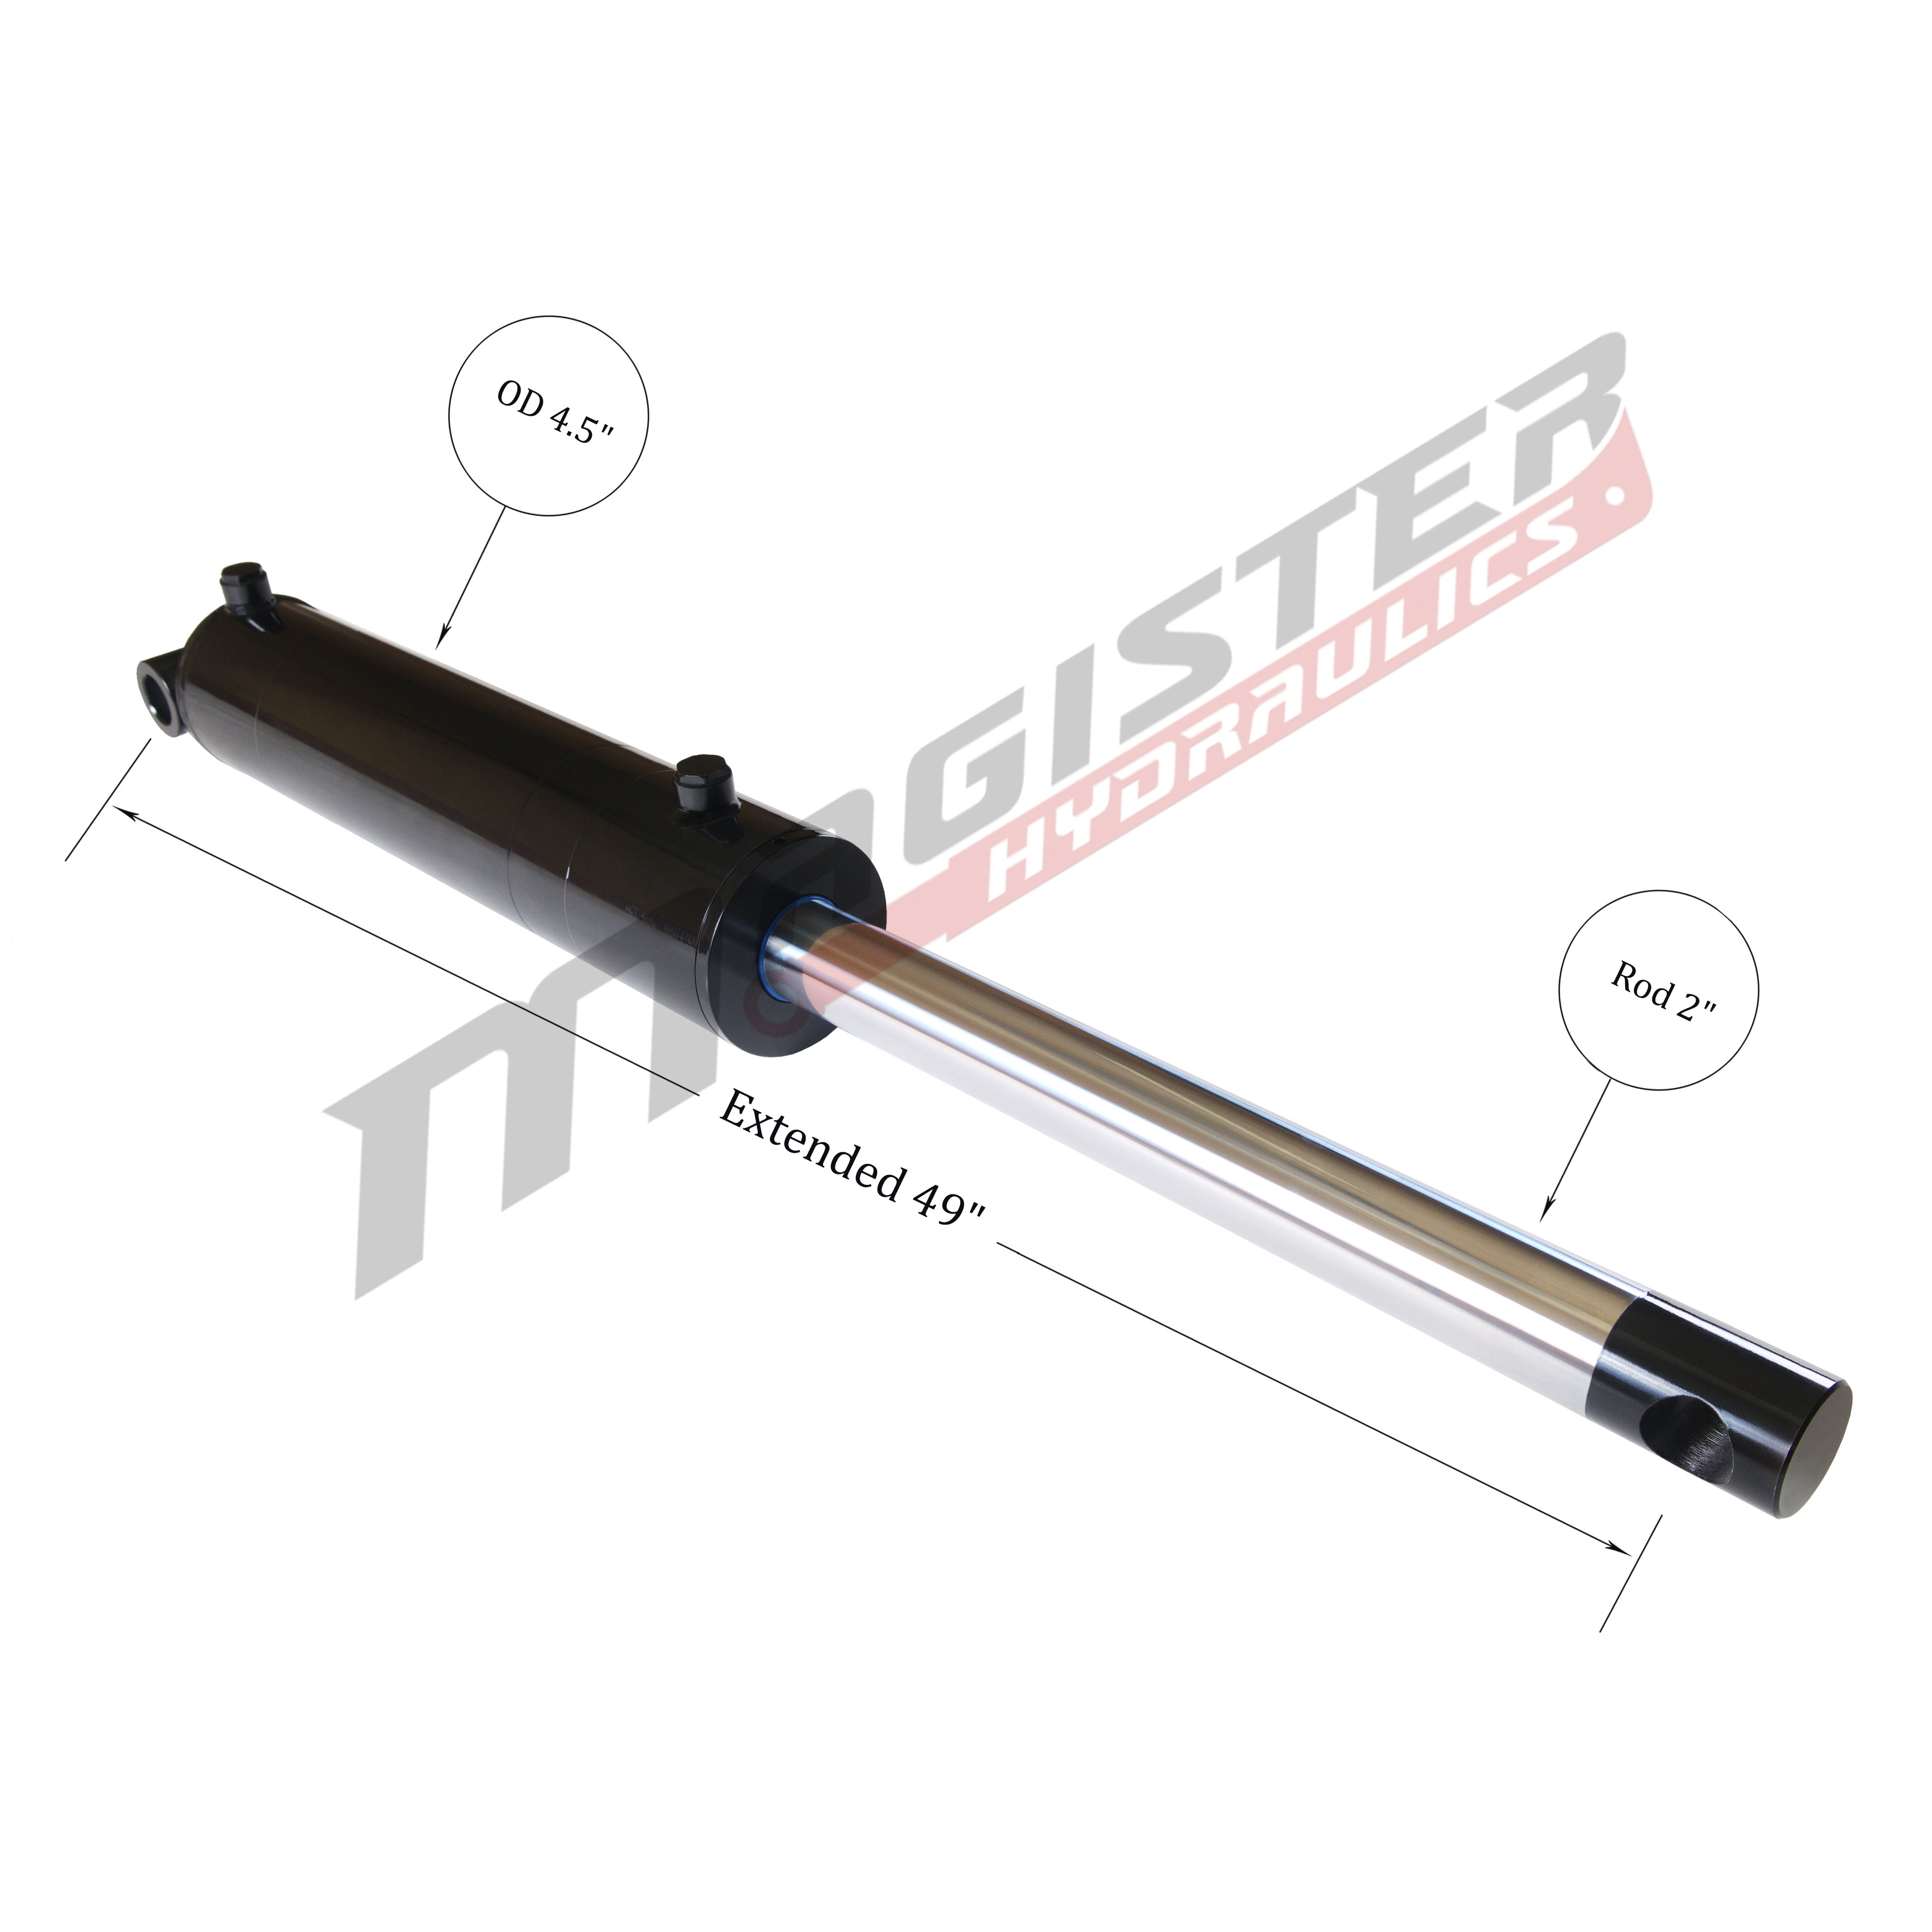 4 bore x 20 stroke hydraulic cylinder, welded pin eye double acting cylinder | Magister Hydraulics